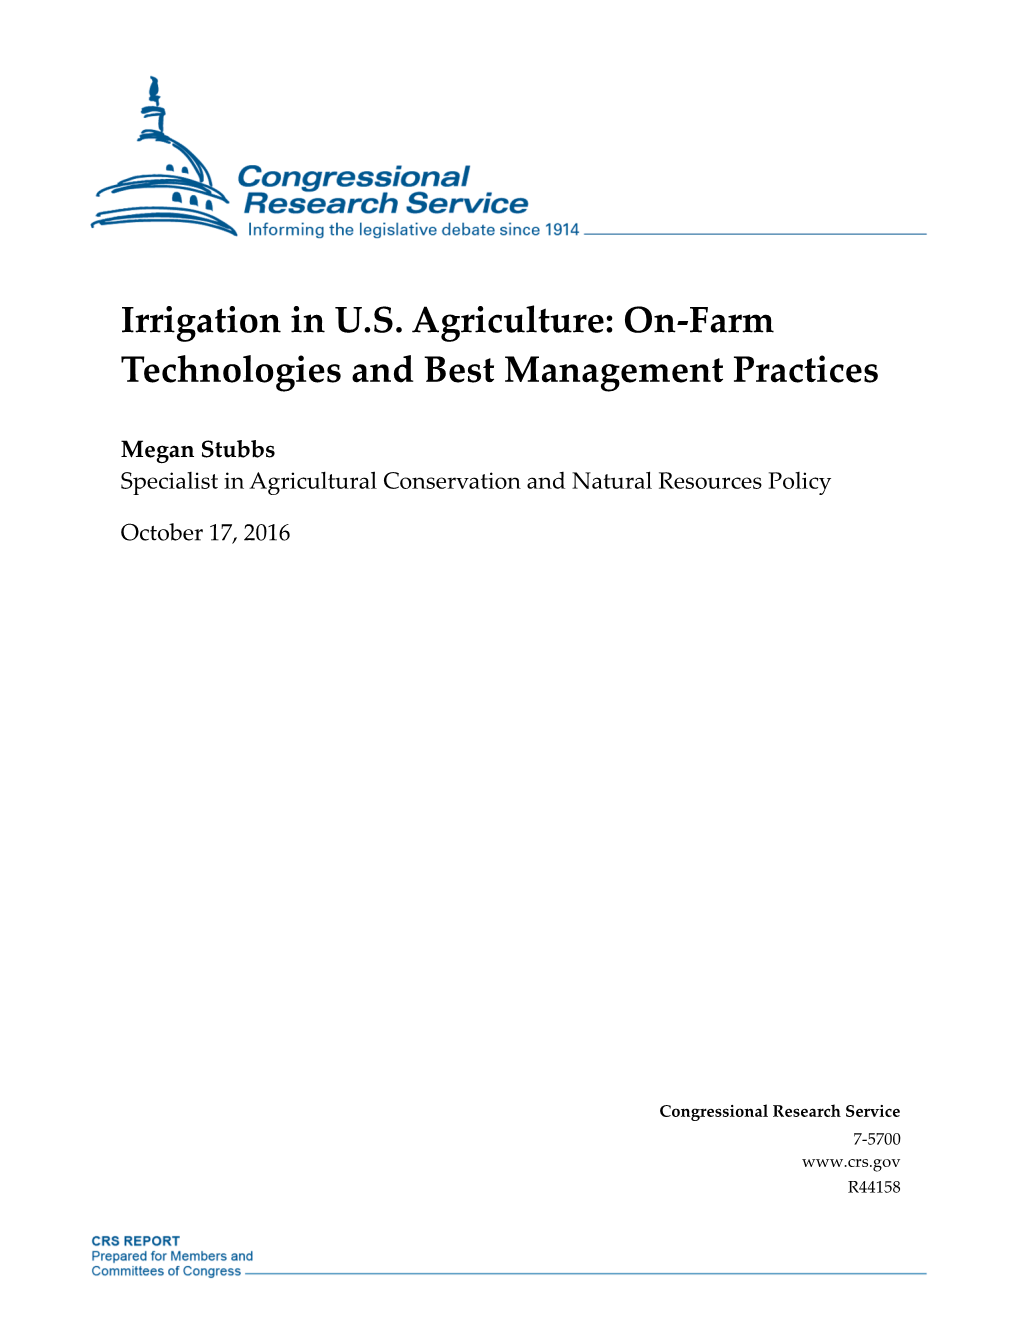 Irrigation in U.S. Agriculture: On-Farm Technologies and Best Management Practices